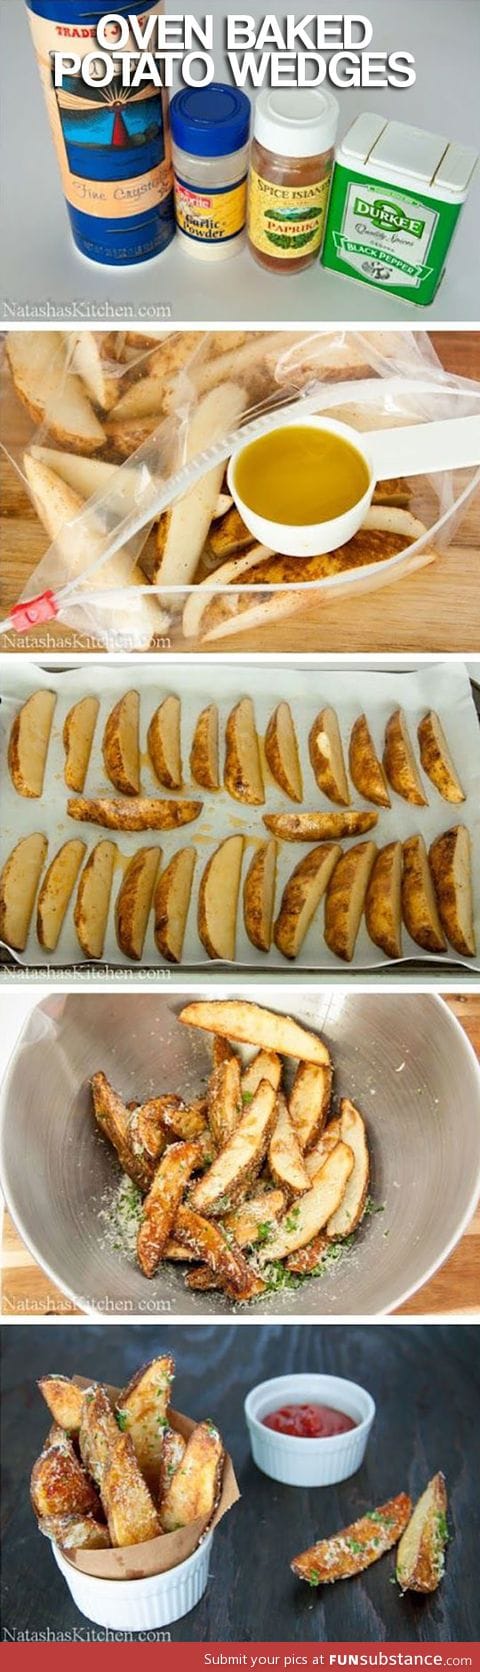 Delicious oven baked potato wedges to die for